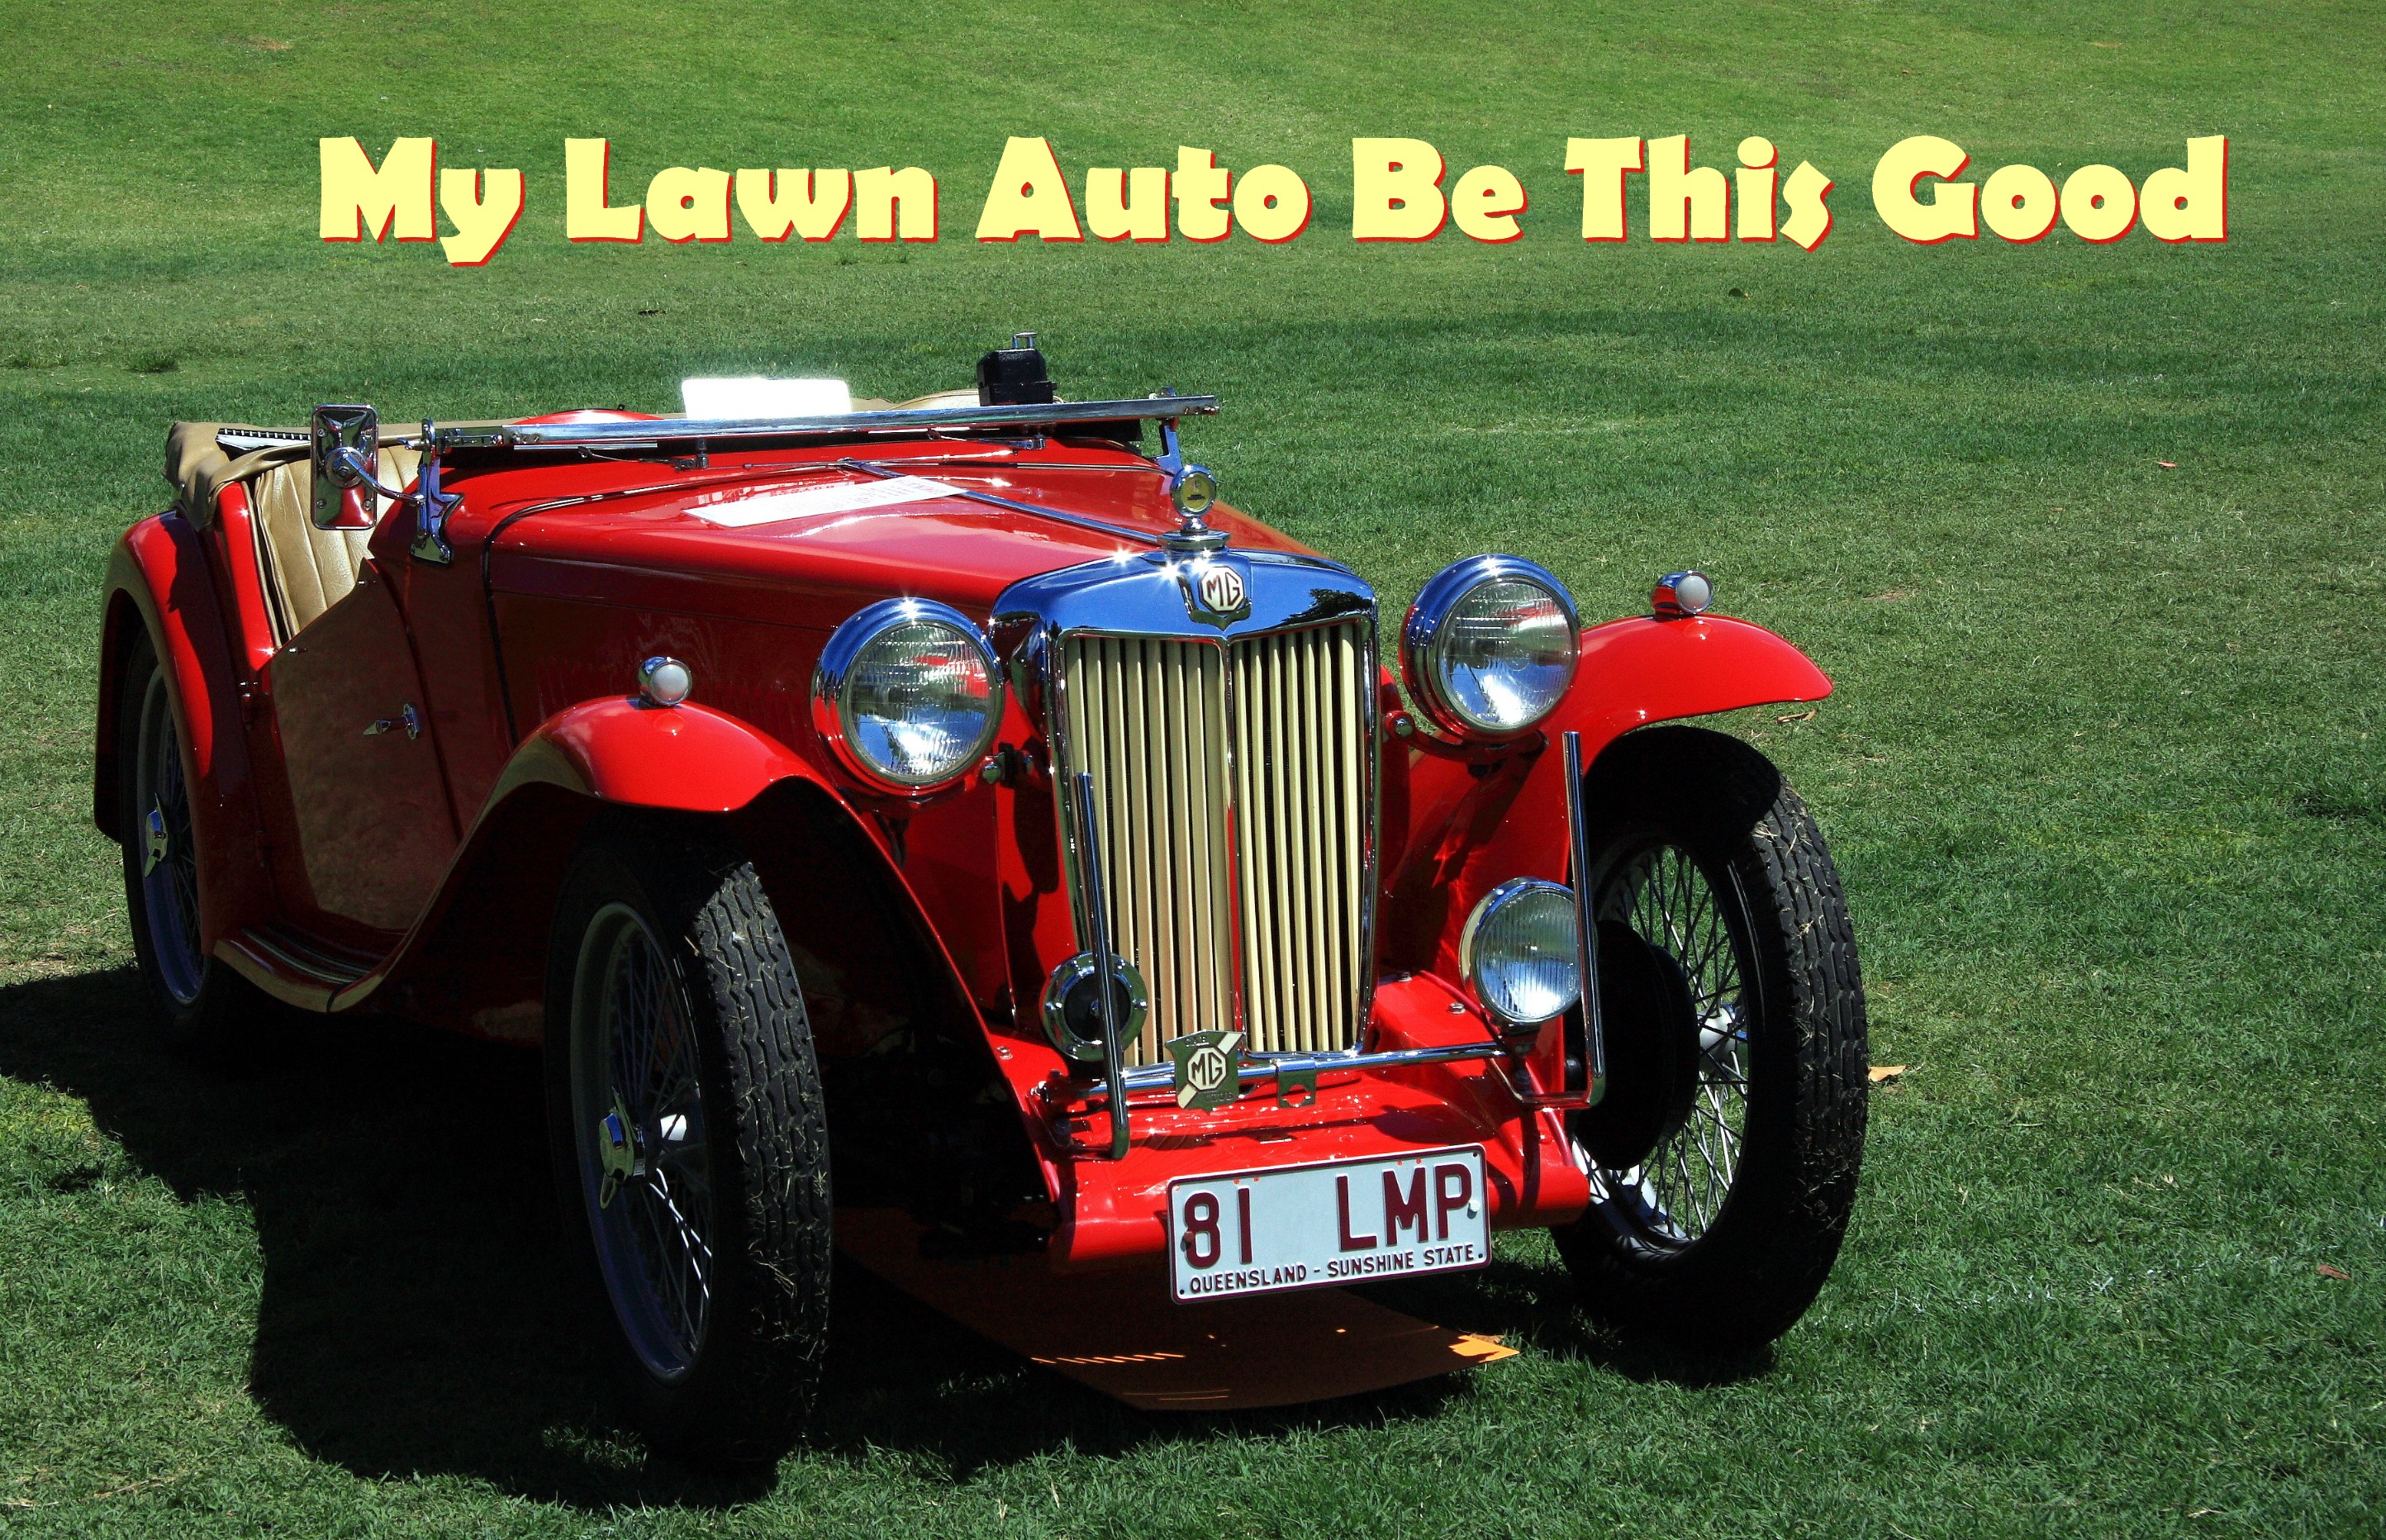 My Lawn Auto be This Good with Turf King Lawn Care